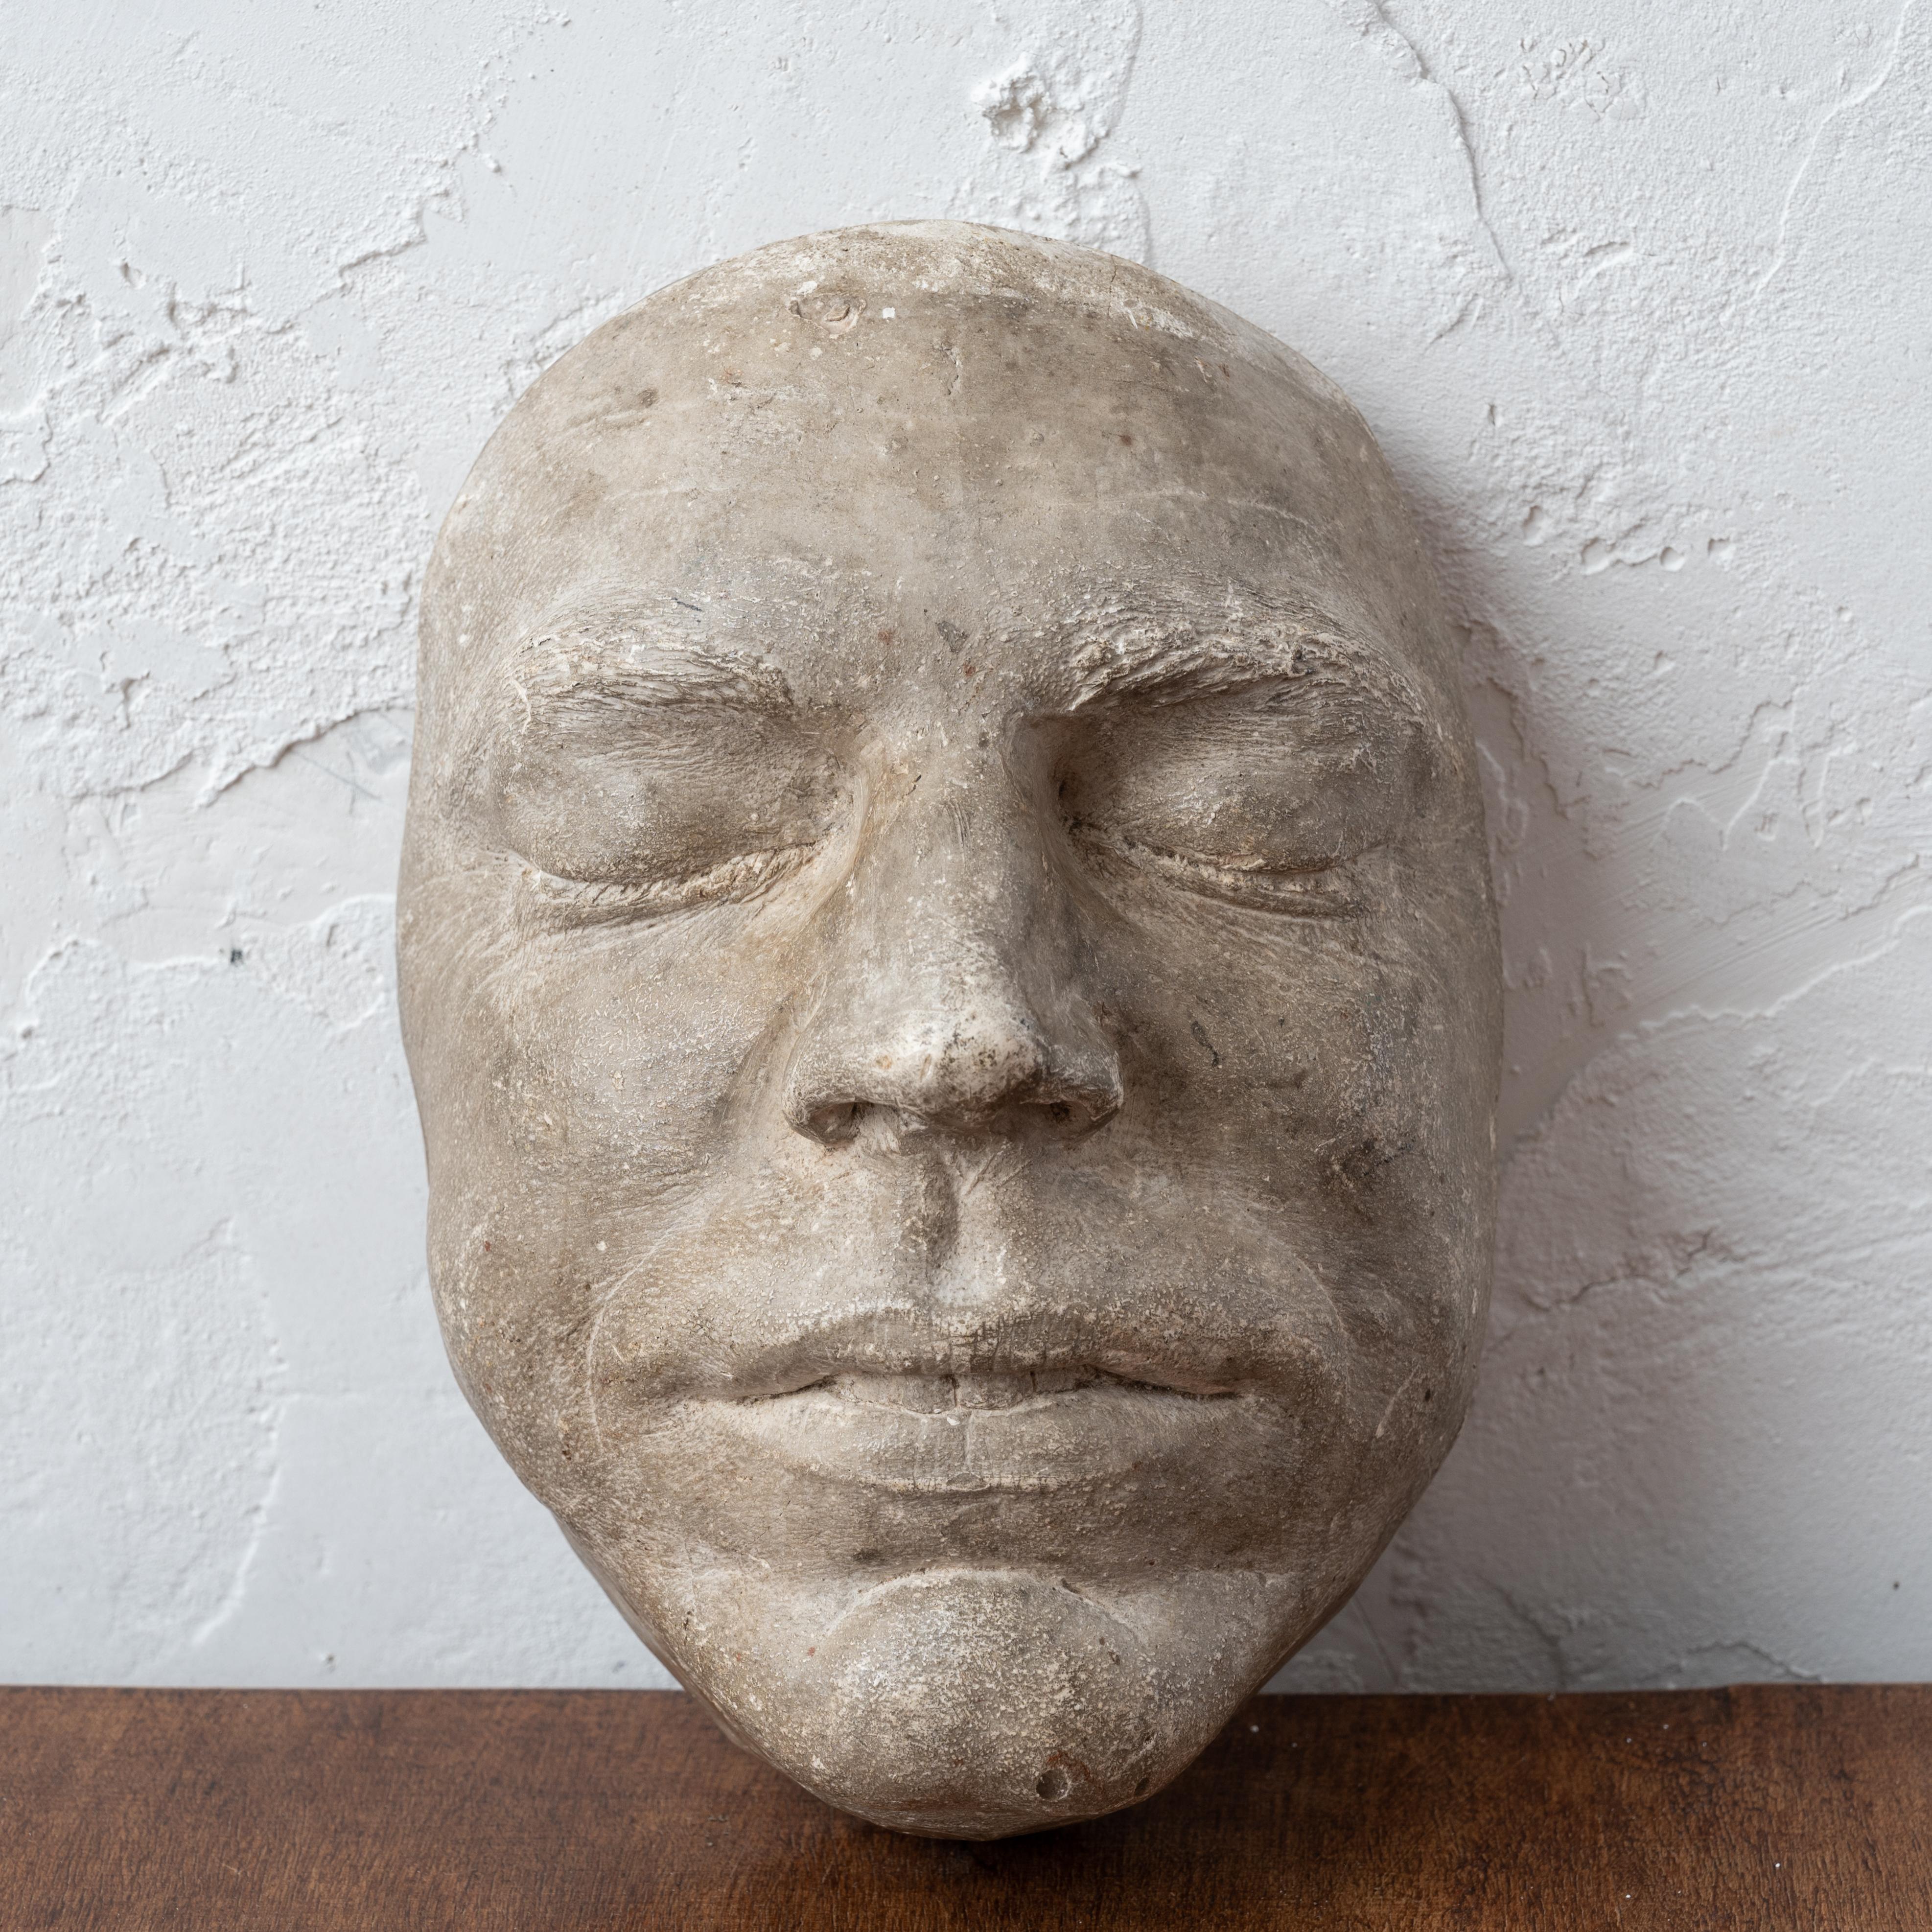 A plaster death mask, circa 1880. 

5 ¾ inches wide by 3 ¾ inches deep by 8 ½ inches tall

